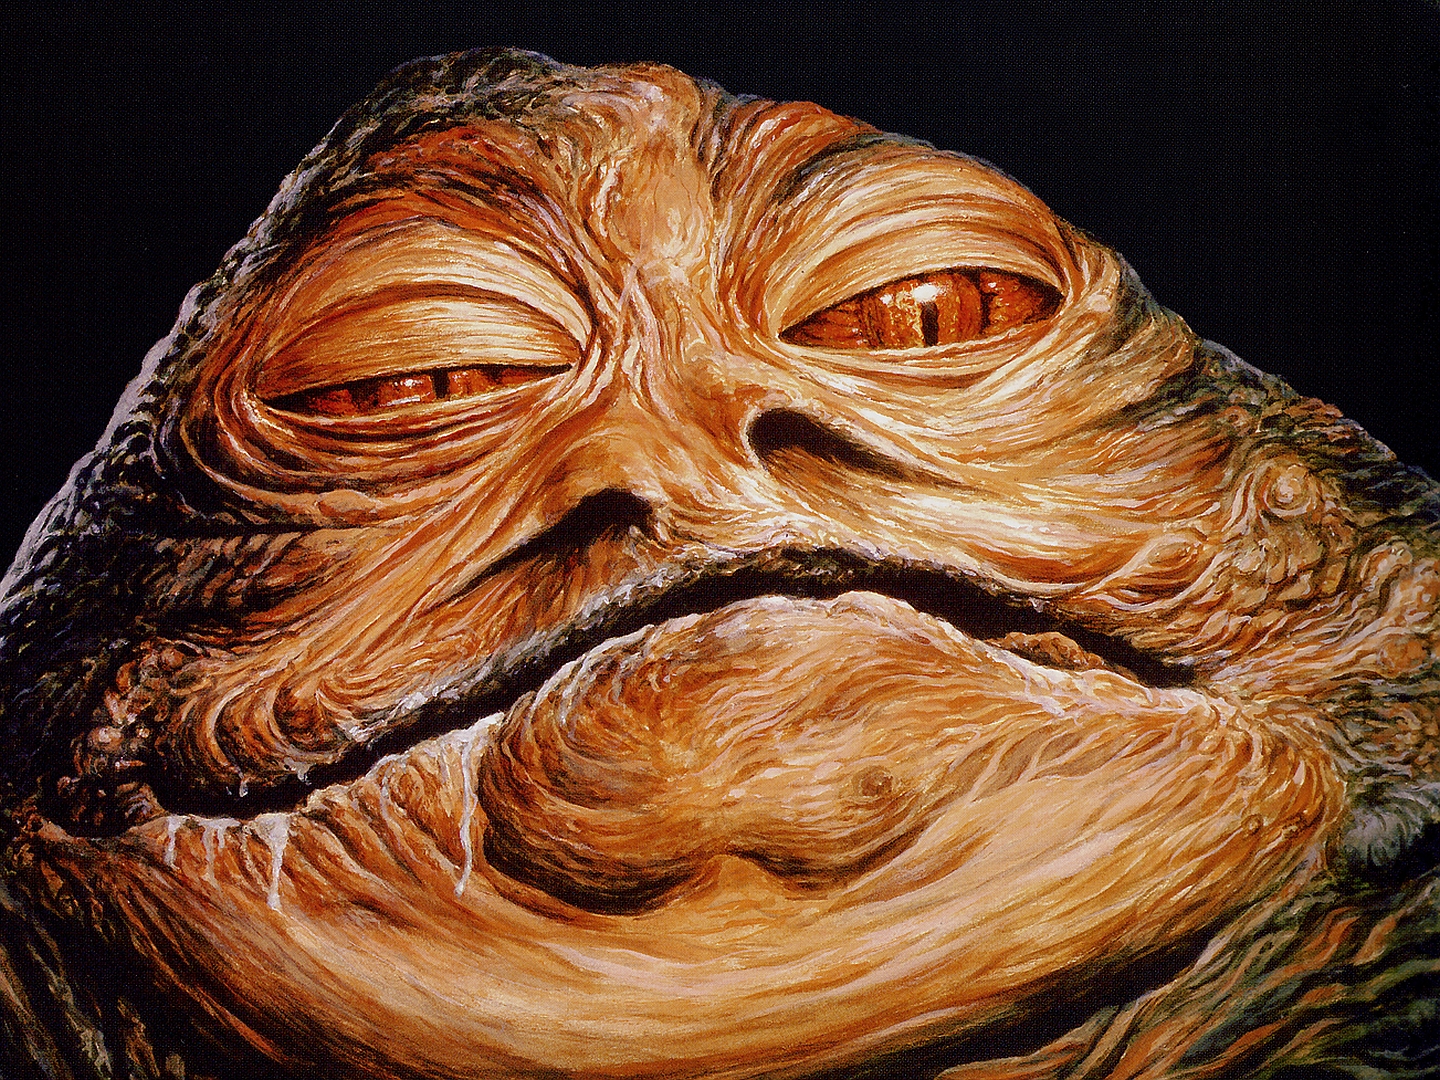 Jabba The Hutt Quotes.